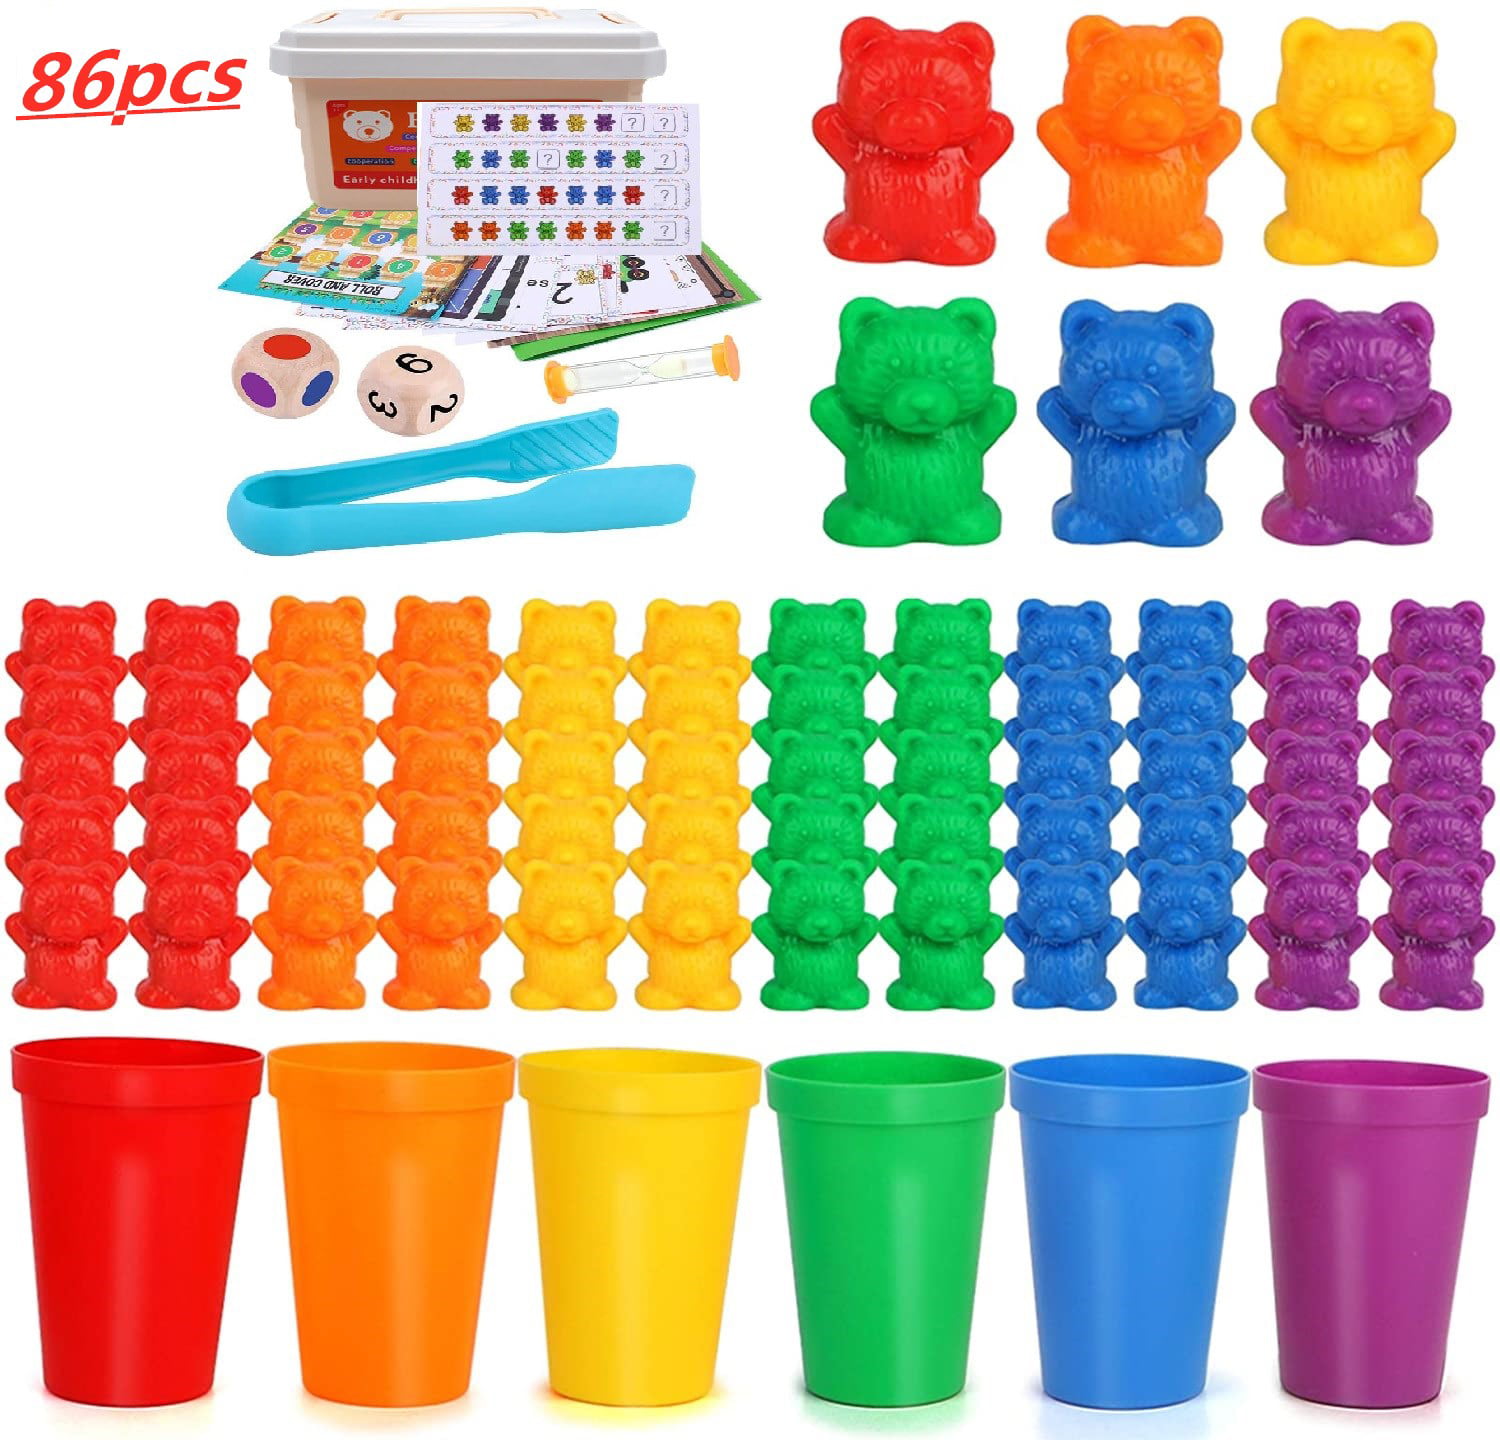 Counting Bears Toys Set,Rainbow Counting Bears with Color Matching 